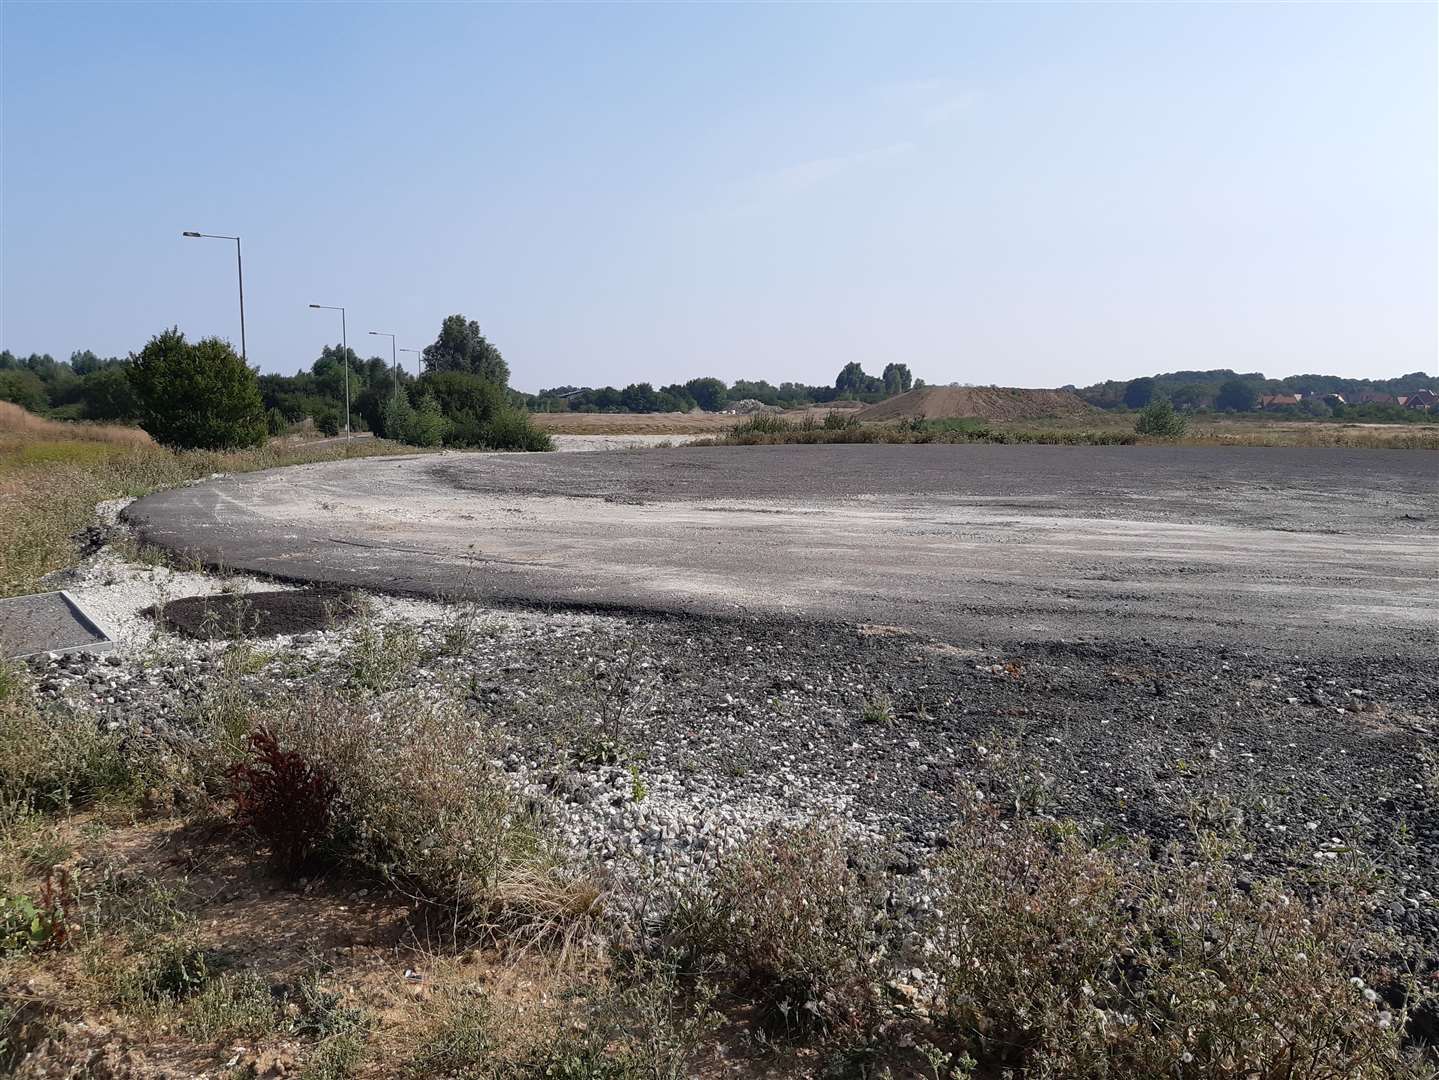 This brownfield site will become home to Ashford's fourth KFC restaurant